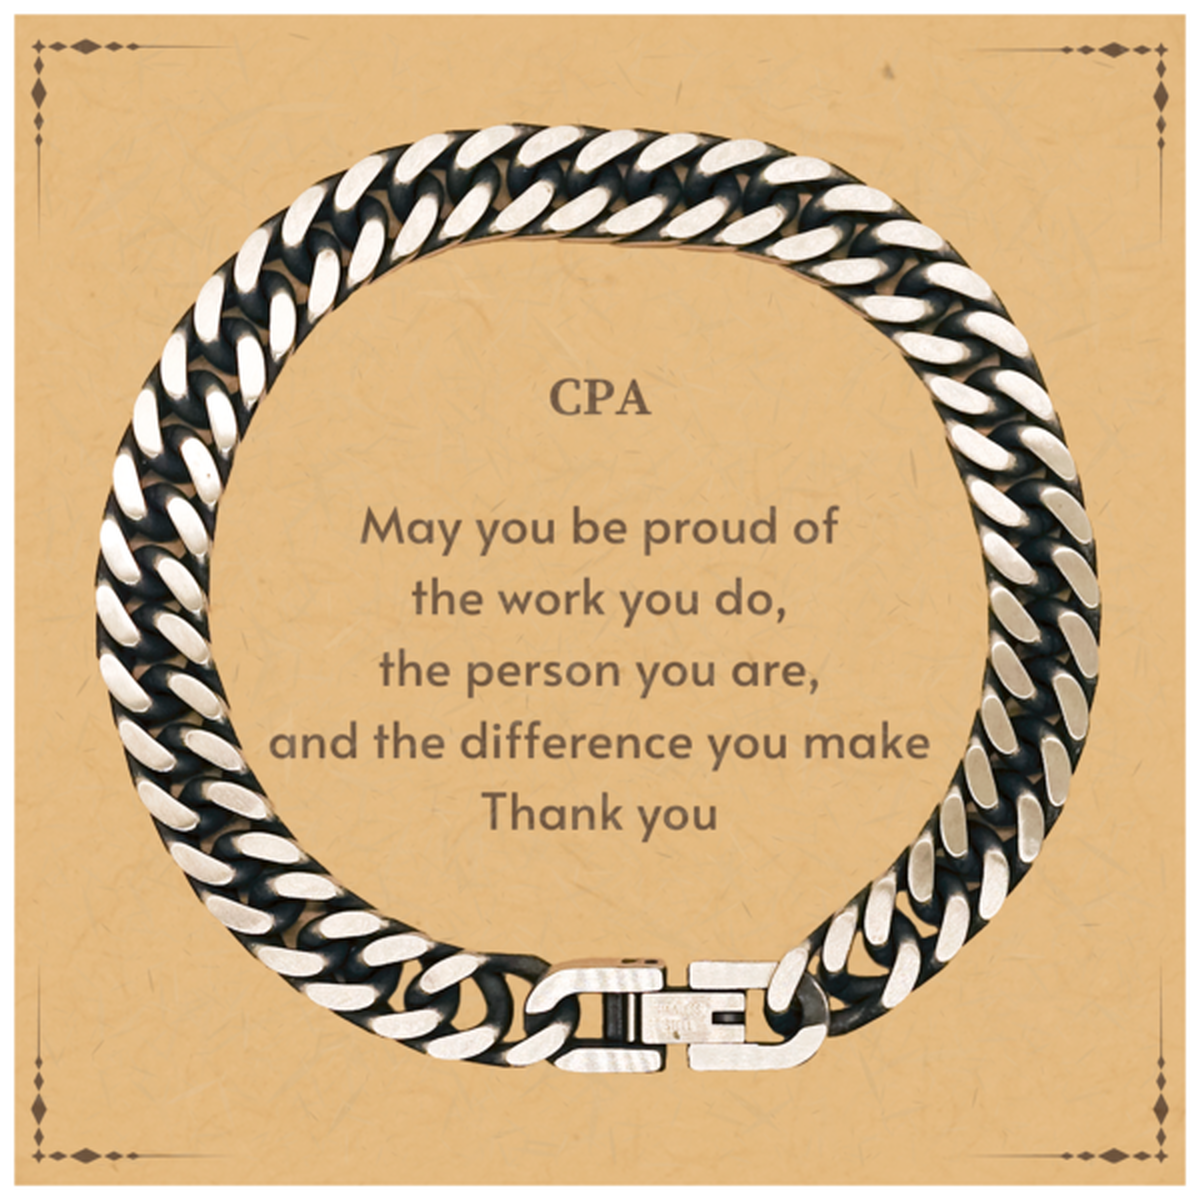 Heartwarming Cuban Link Chain Bracelet Retirement Coworkers Gifts for CPA, CPA May You be proud of the work you do, the person you are Gifts for Boss Men Women Friends